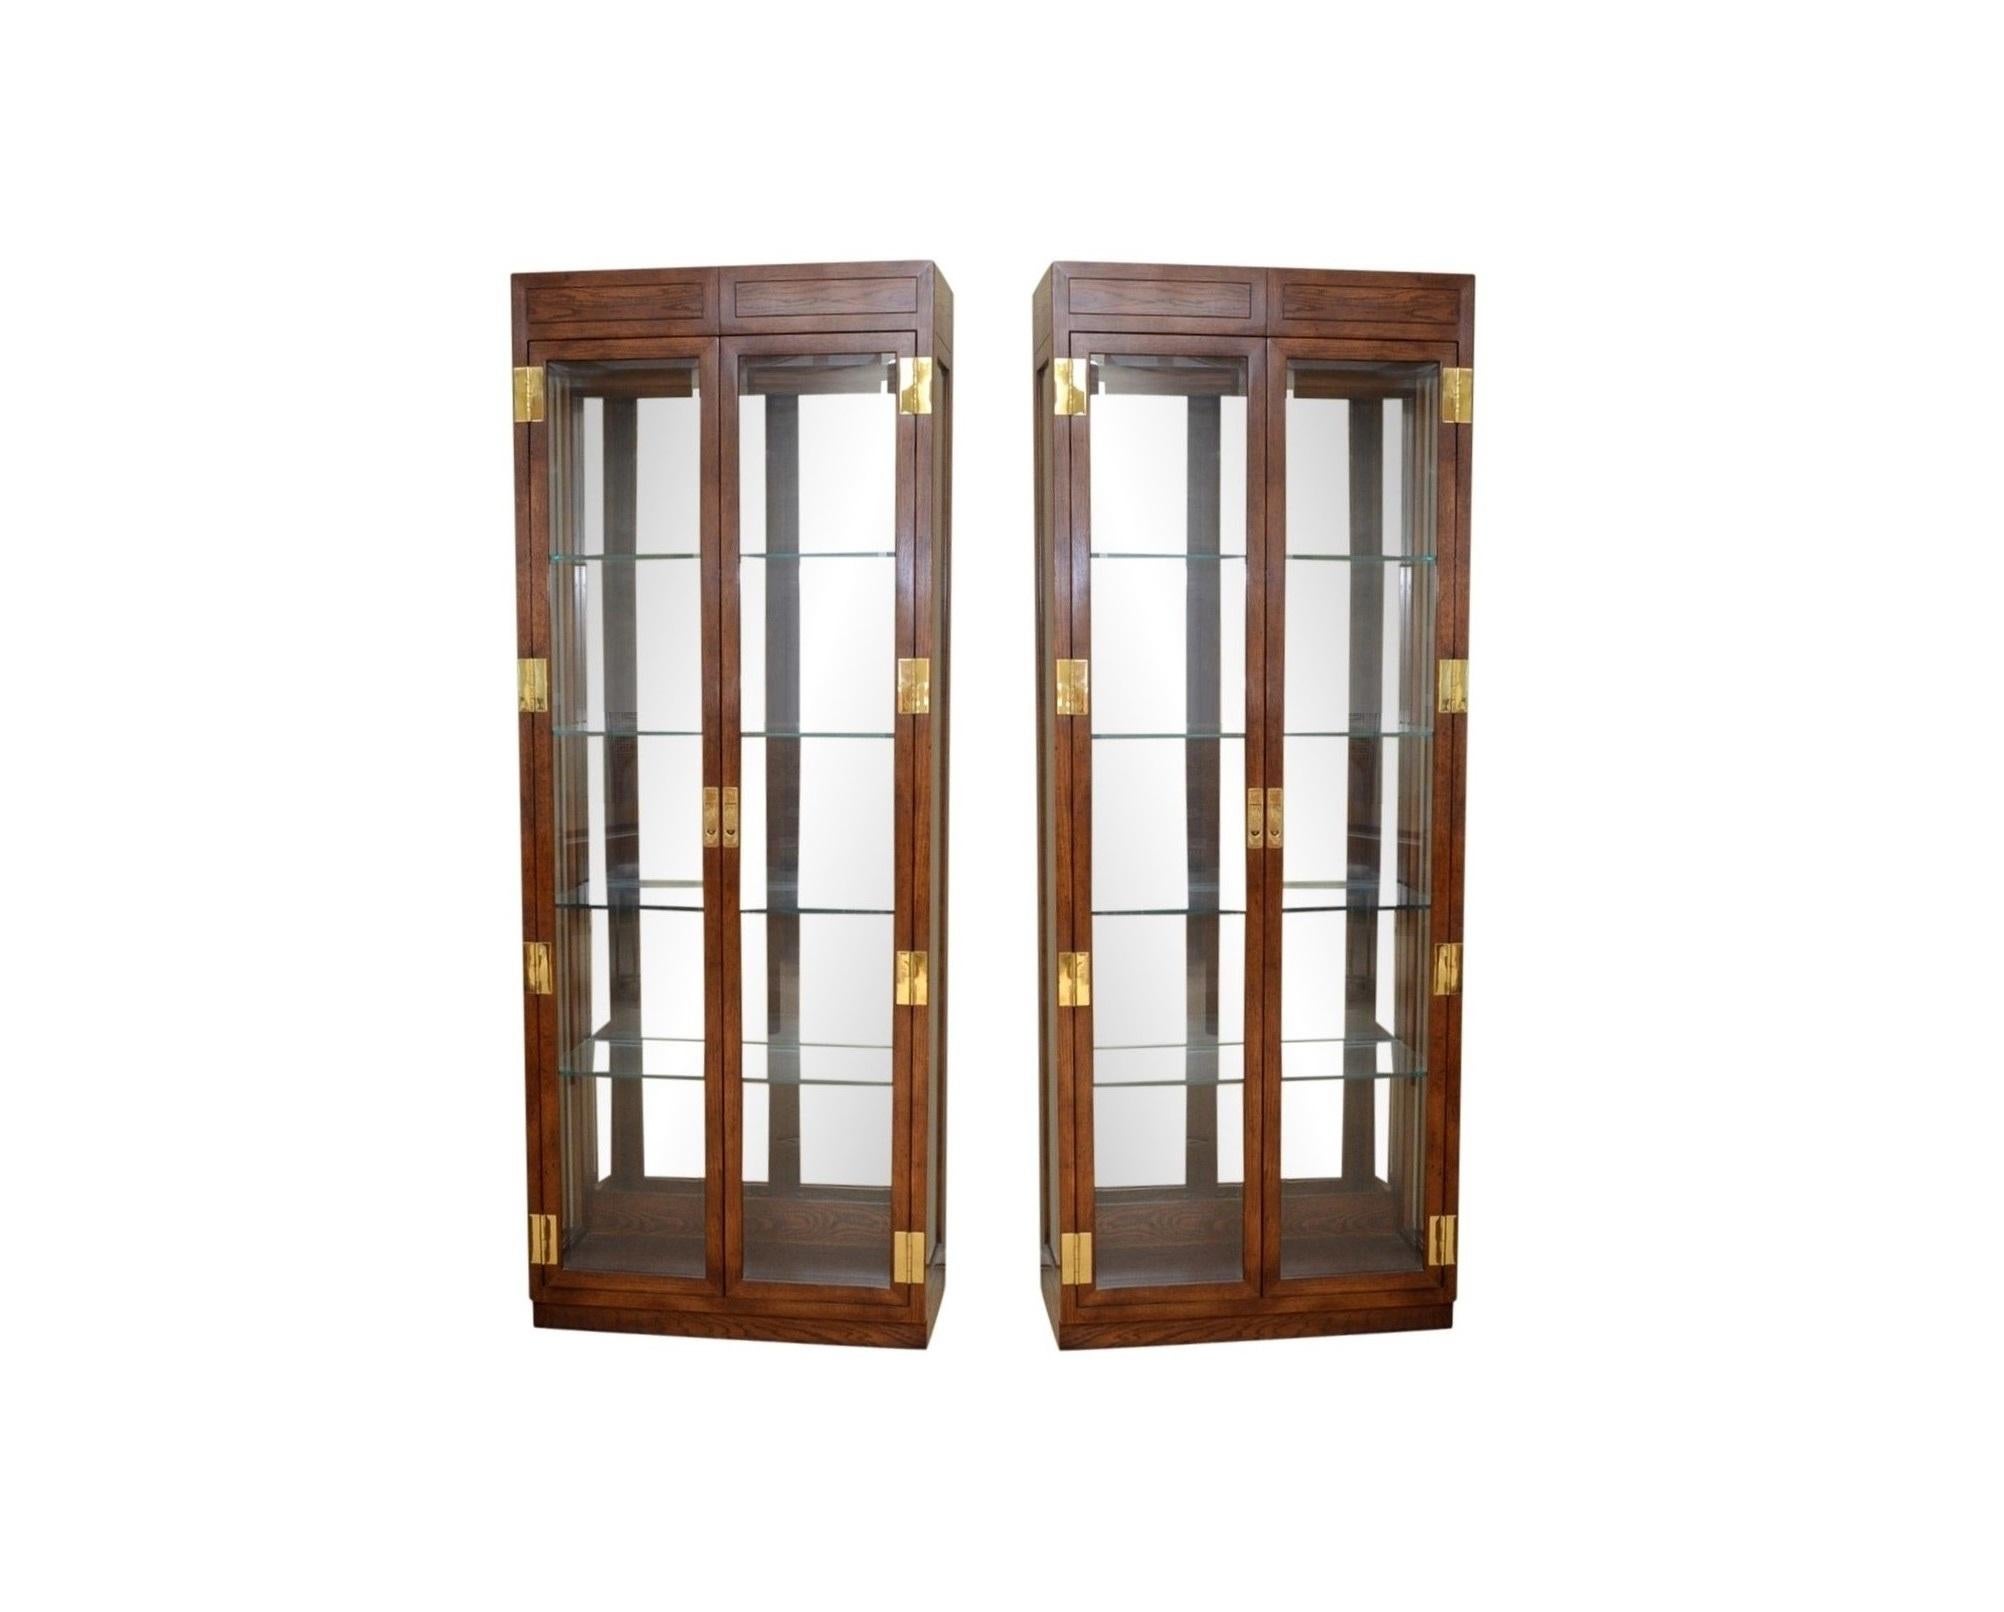 We are very pleased to offer a great pair of gorgeous, sleek and minimalist display cabinets made by the famous Henredon furniture makers, made in the USA. Part of Henredon’s early 1980’s Scene One Collection. Each cabinet is crafted from hardwood